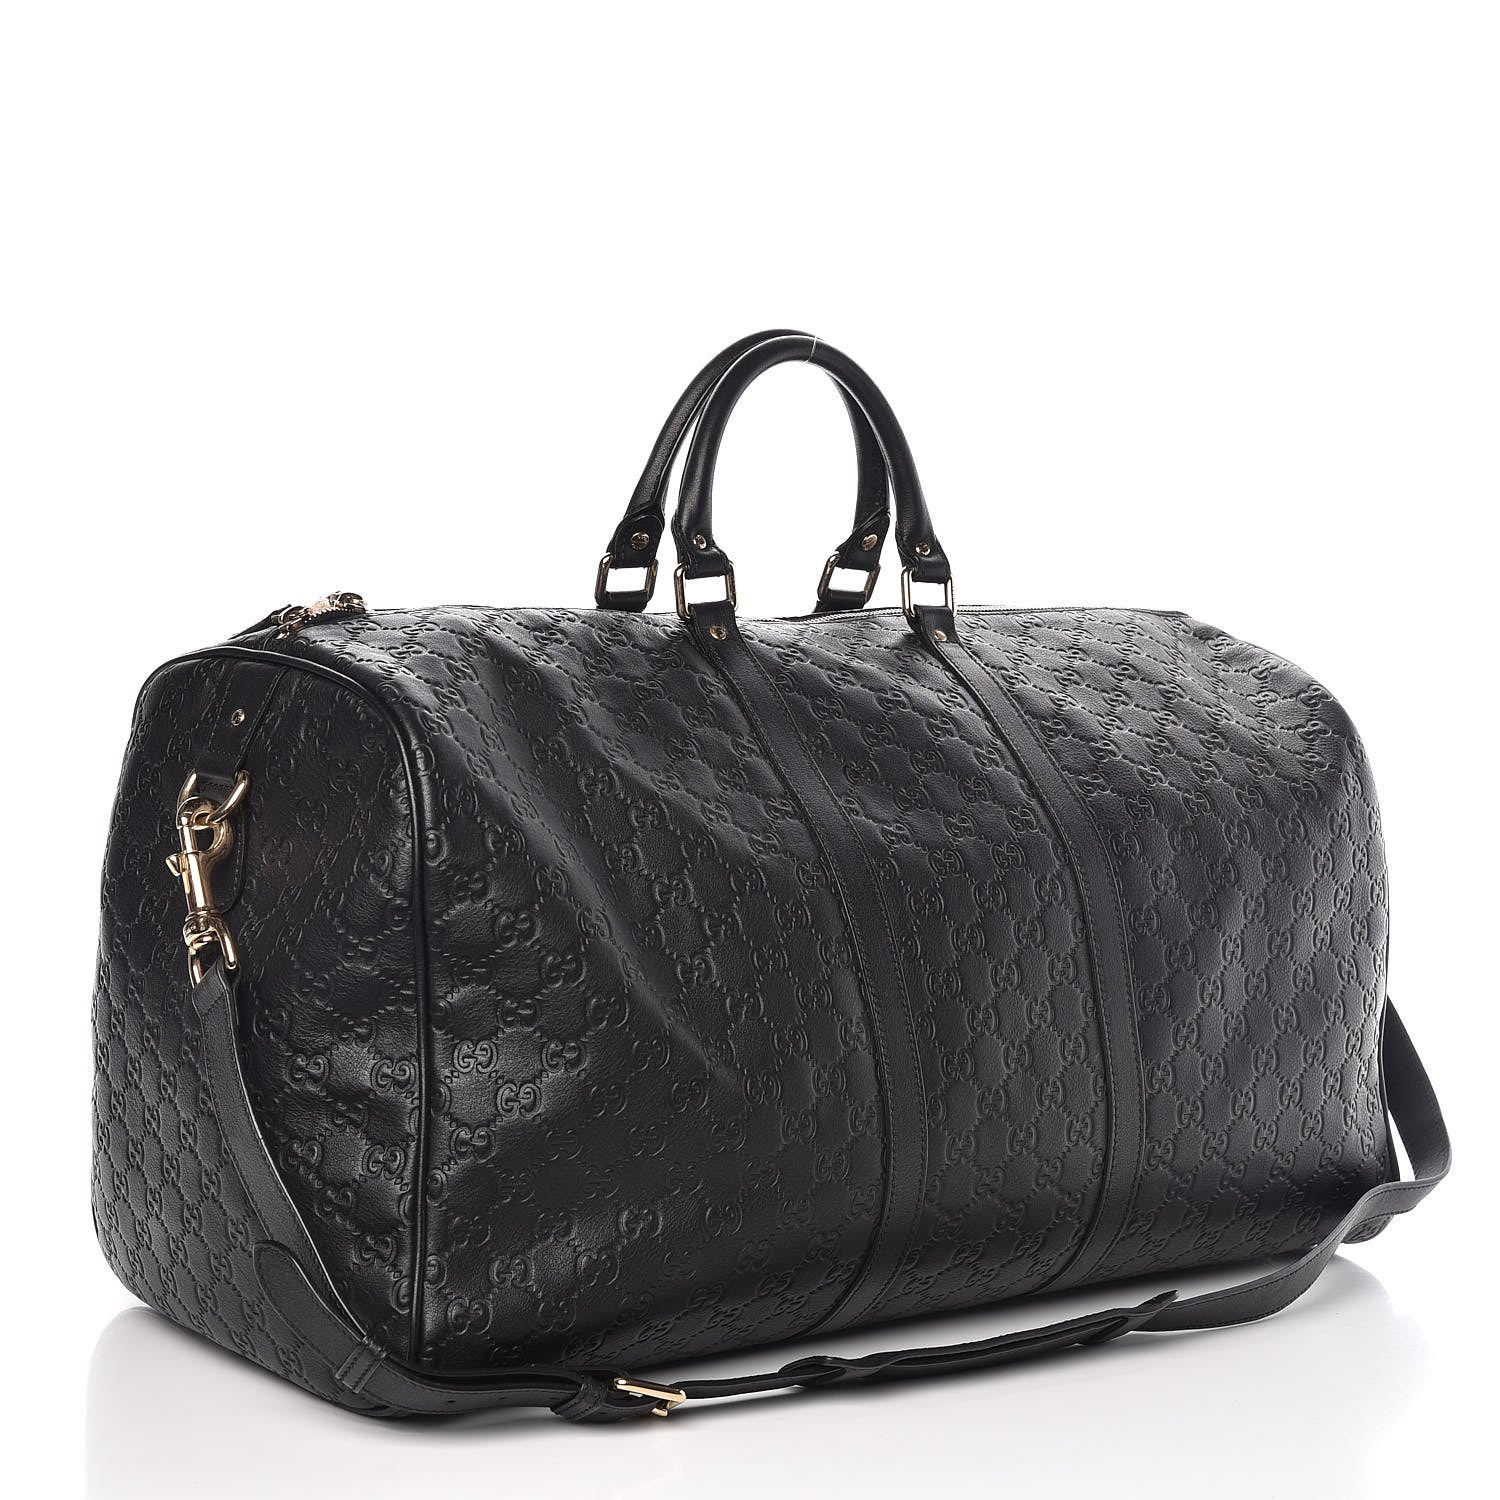 Patent leather travel bag